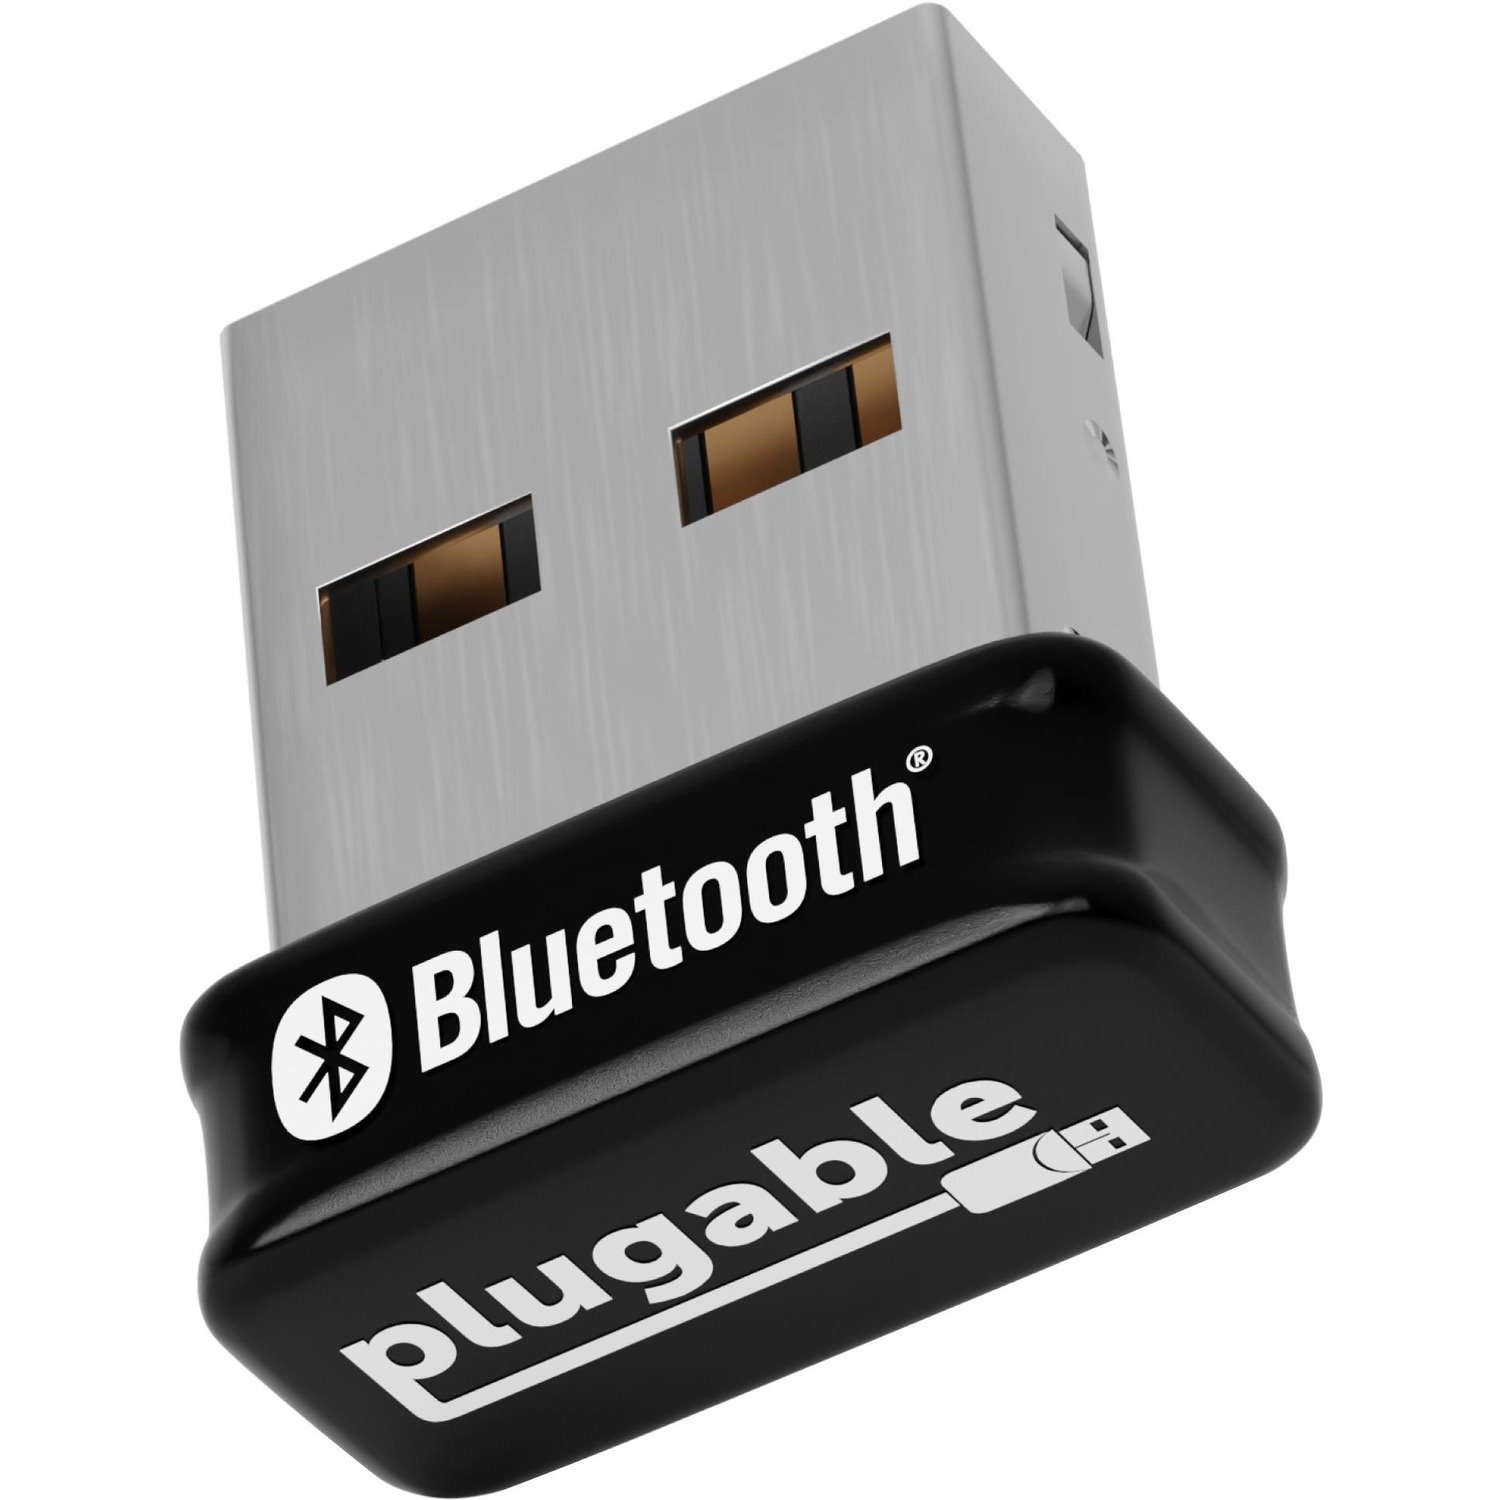 Plugable USB Bluetooth Adapter for PC, Bluetooth 5.0 Dongle, Compatible with Windows